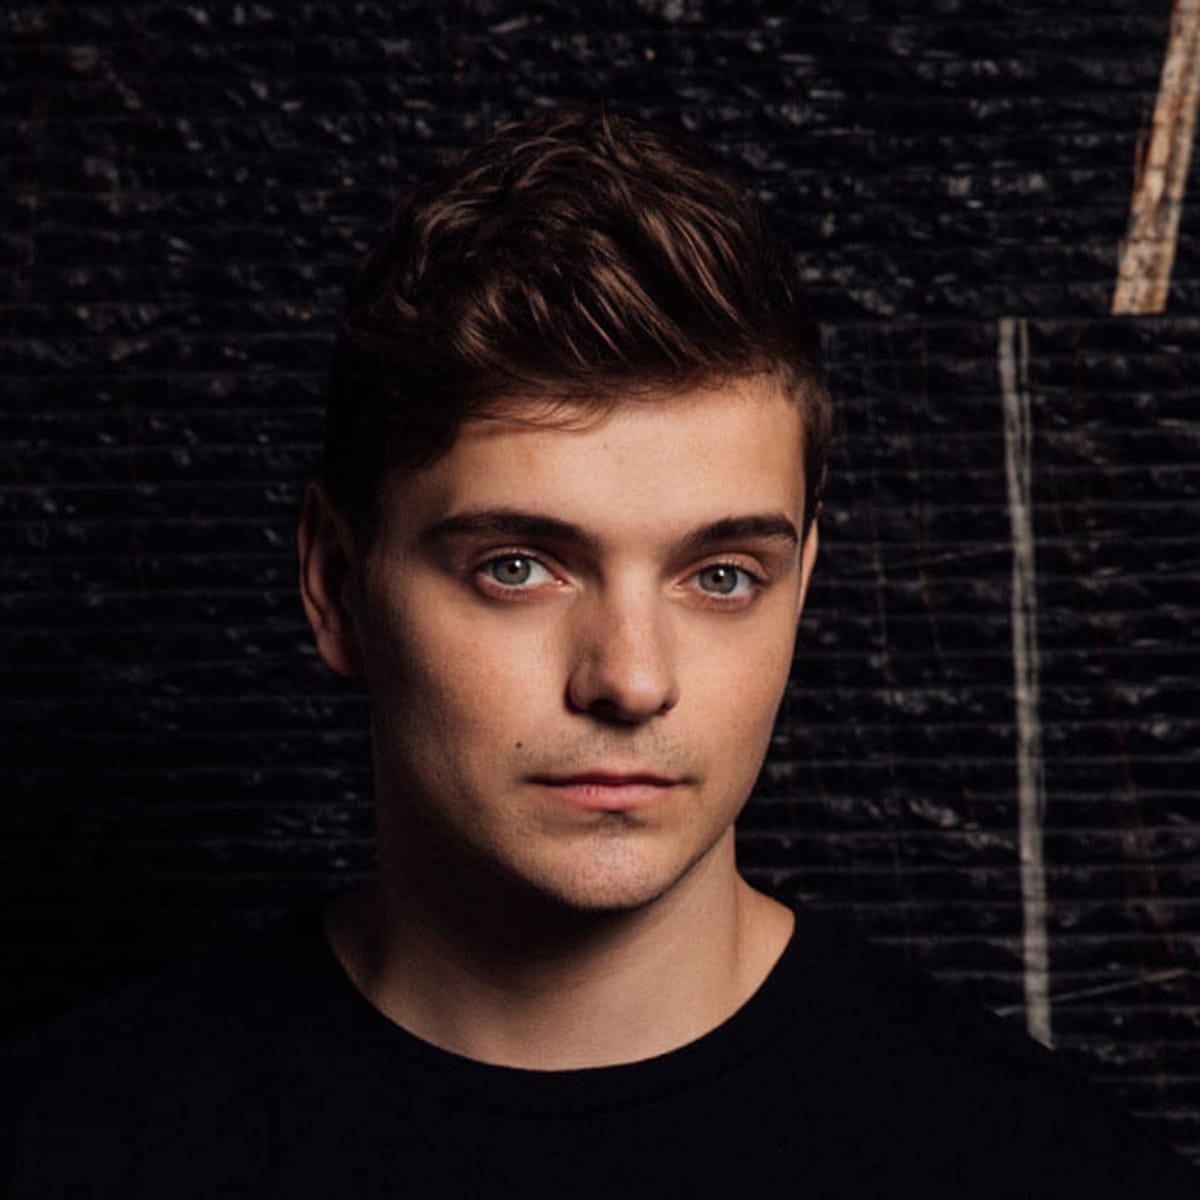 Martin Garrix Debuts New John Martin Collab During Rooftop Livestream -   - The Latest Electronic Dance Music News, Reviews & Artists